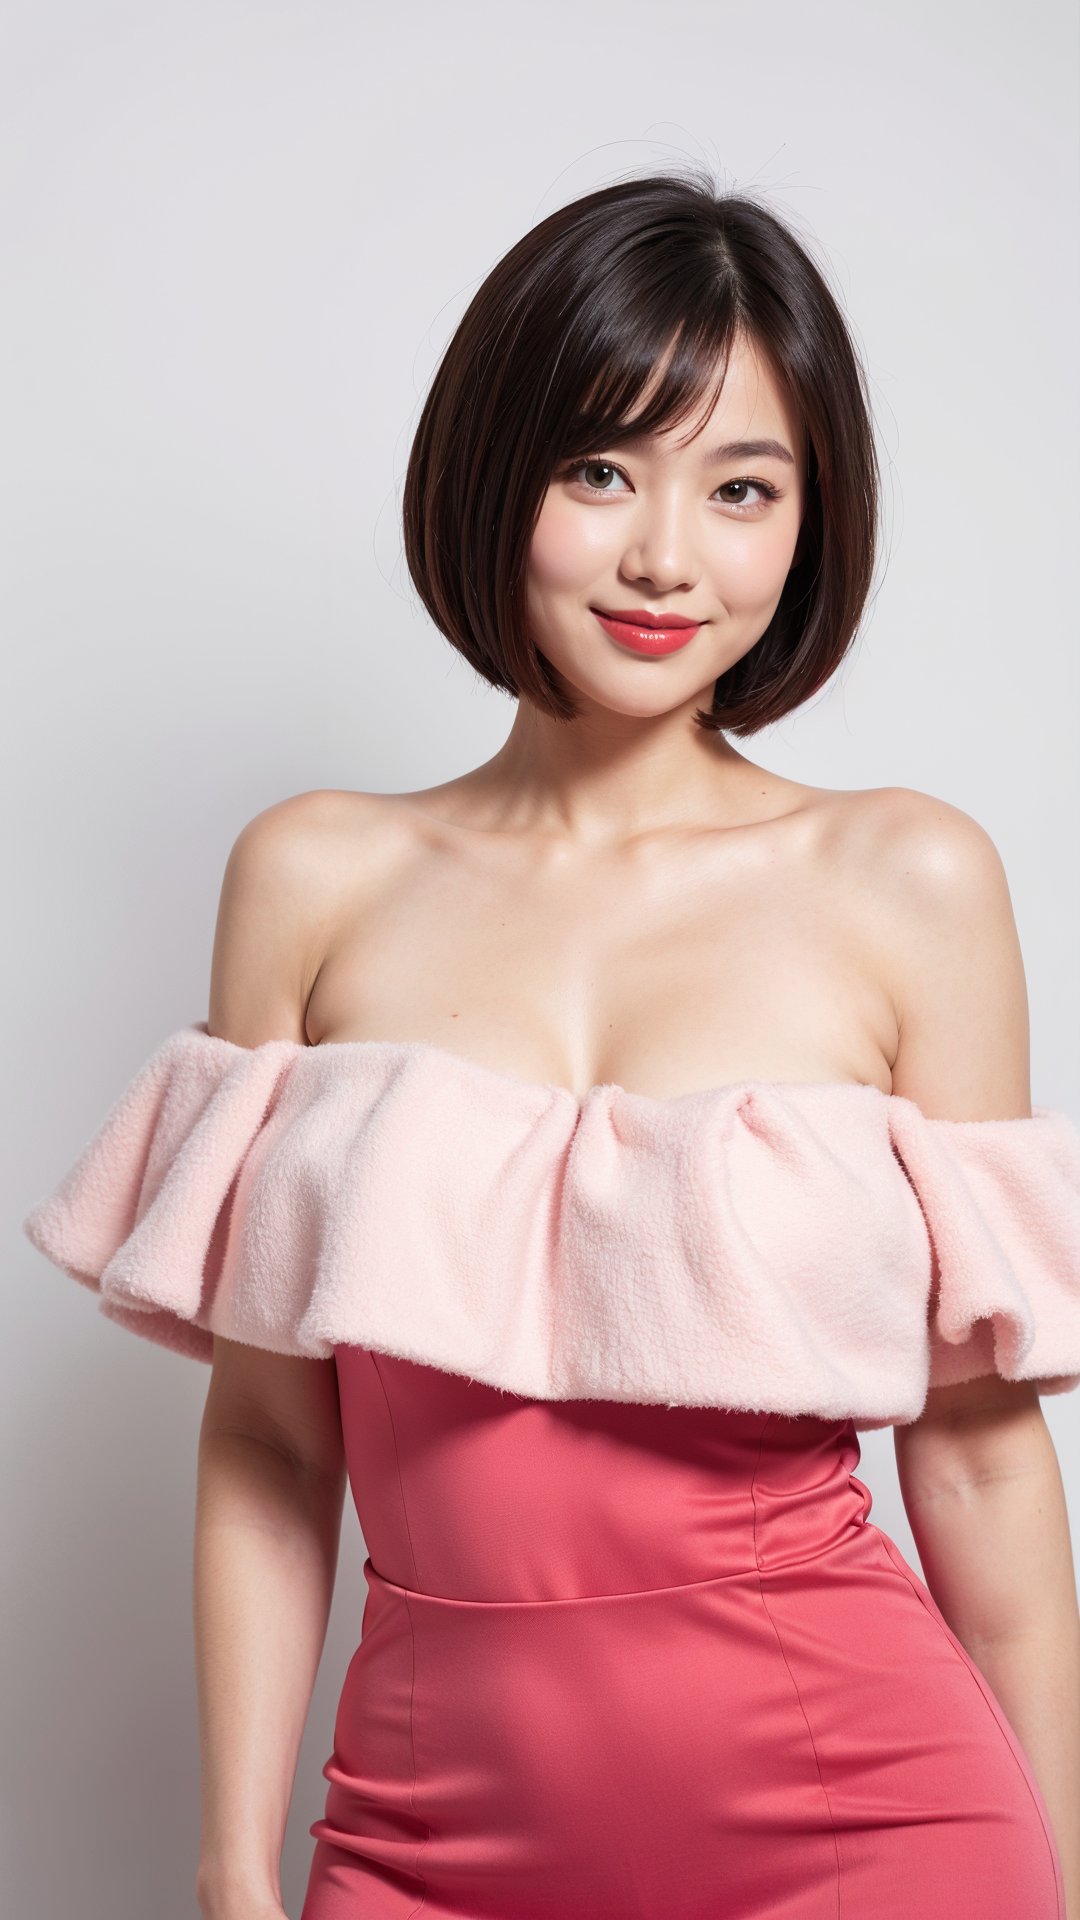 woman, medium bob cut, red lips, pink dress, off shoulders, (large breast), white background, upper body, light smile, (curvy)